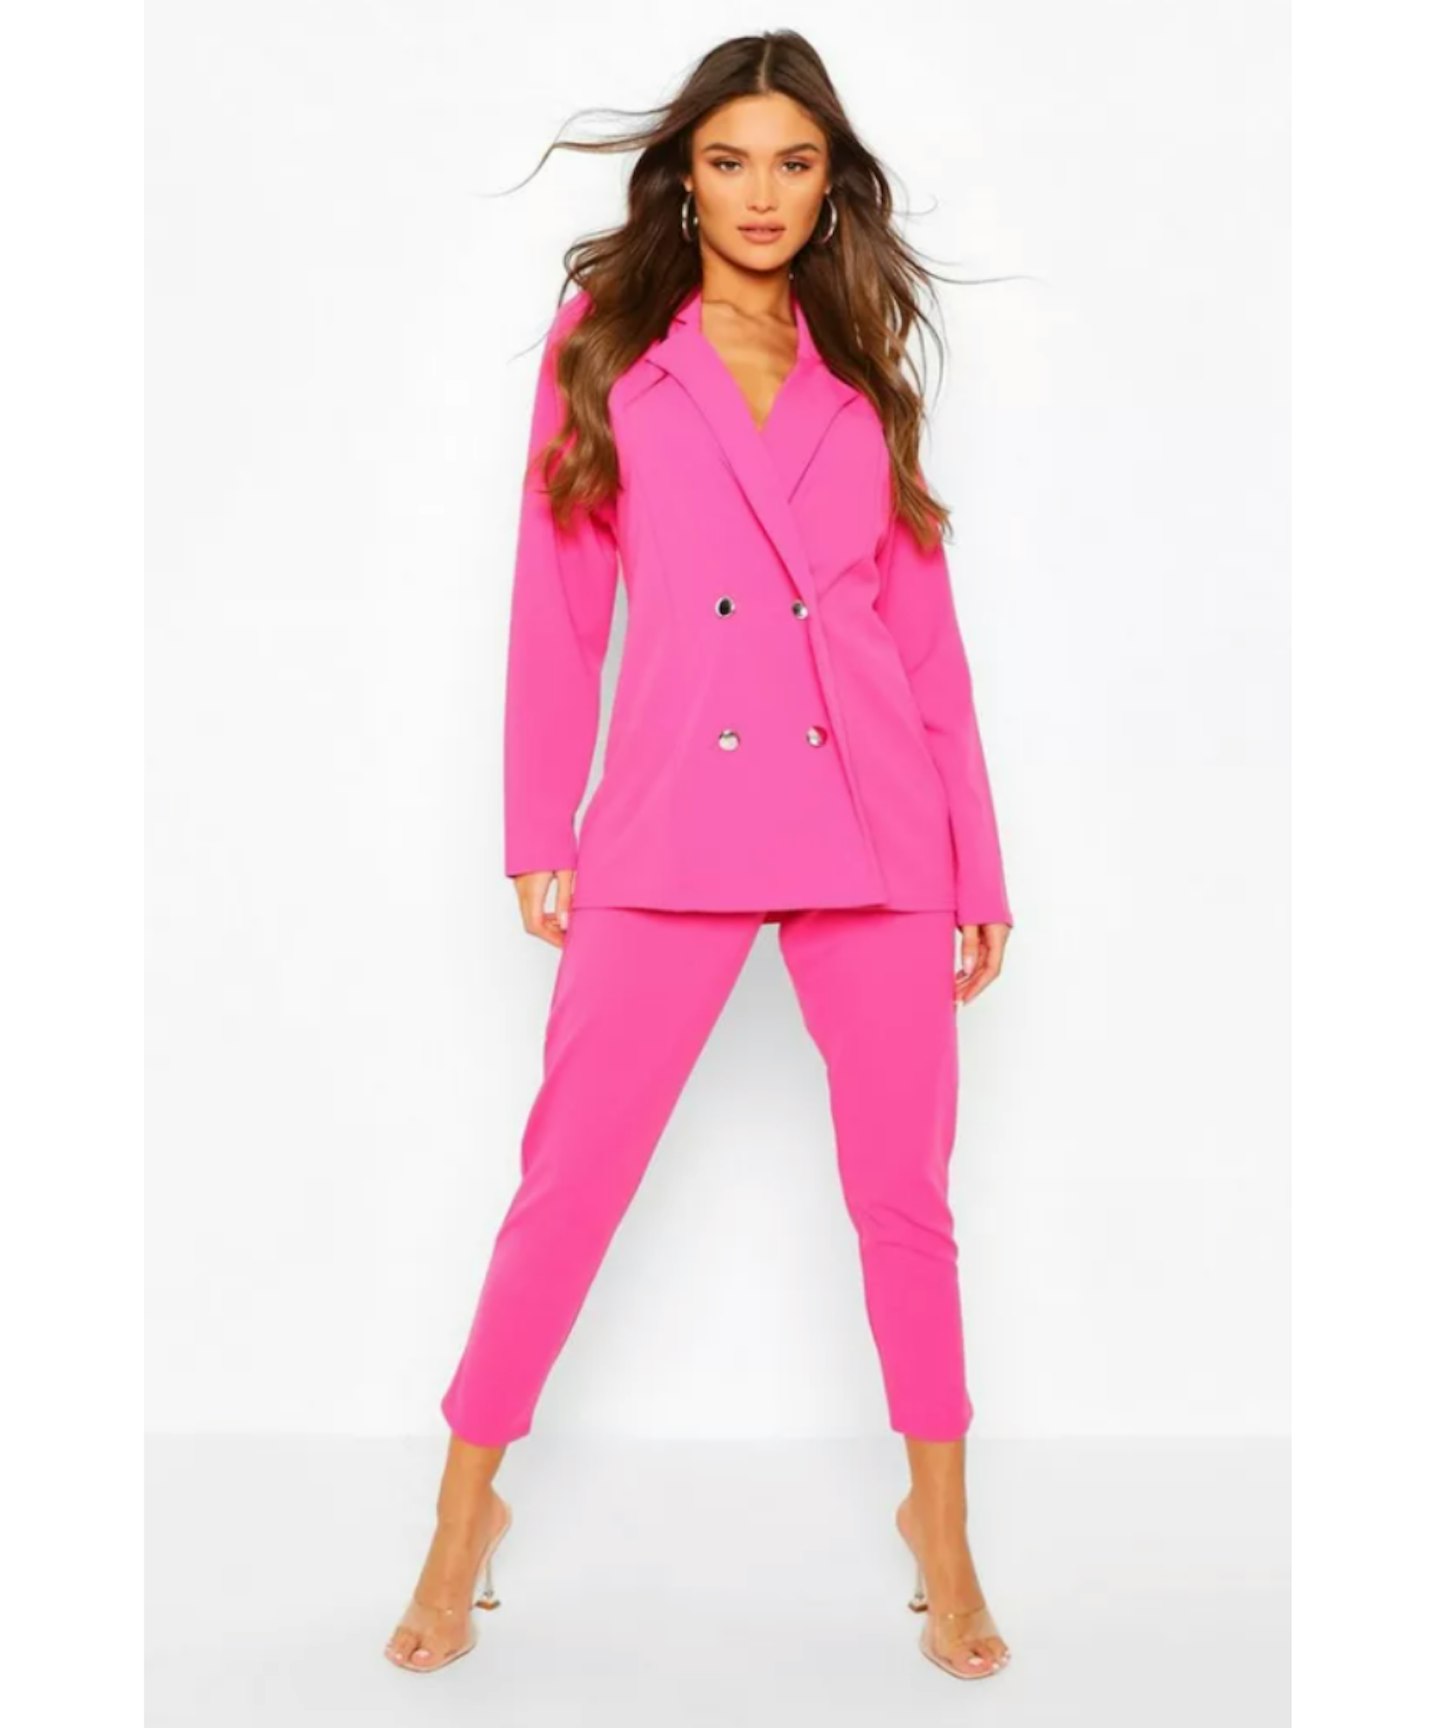 https://images.bauerhosting.com/legacy/media/6234/aaec/f7fa/fc48/87d9/16fa/Zendaya-proves-that-Barbie-pink-suits-are-back-and-cooler-than-ever-on-the-high-street-uk-5.png?auto=format&w=1440&q=80